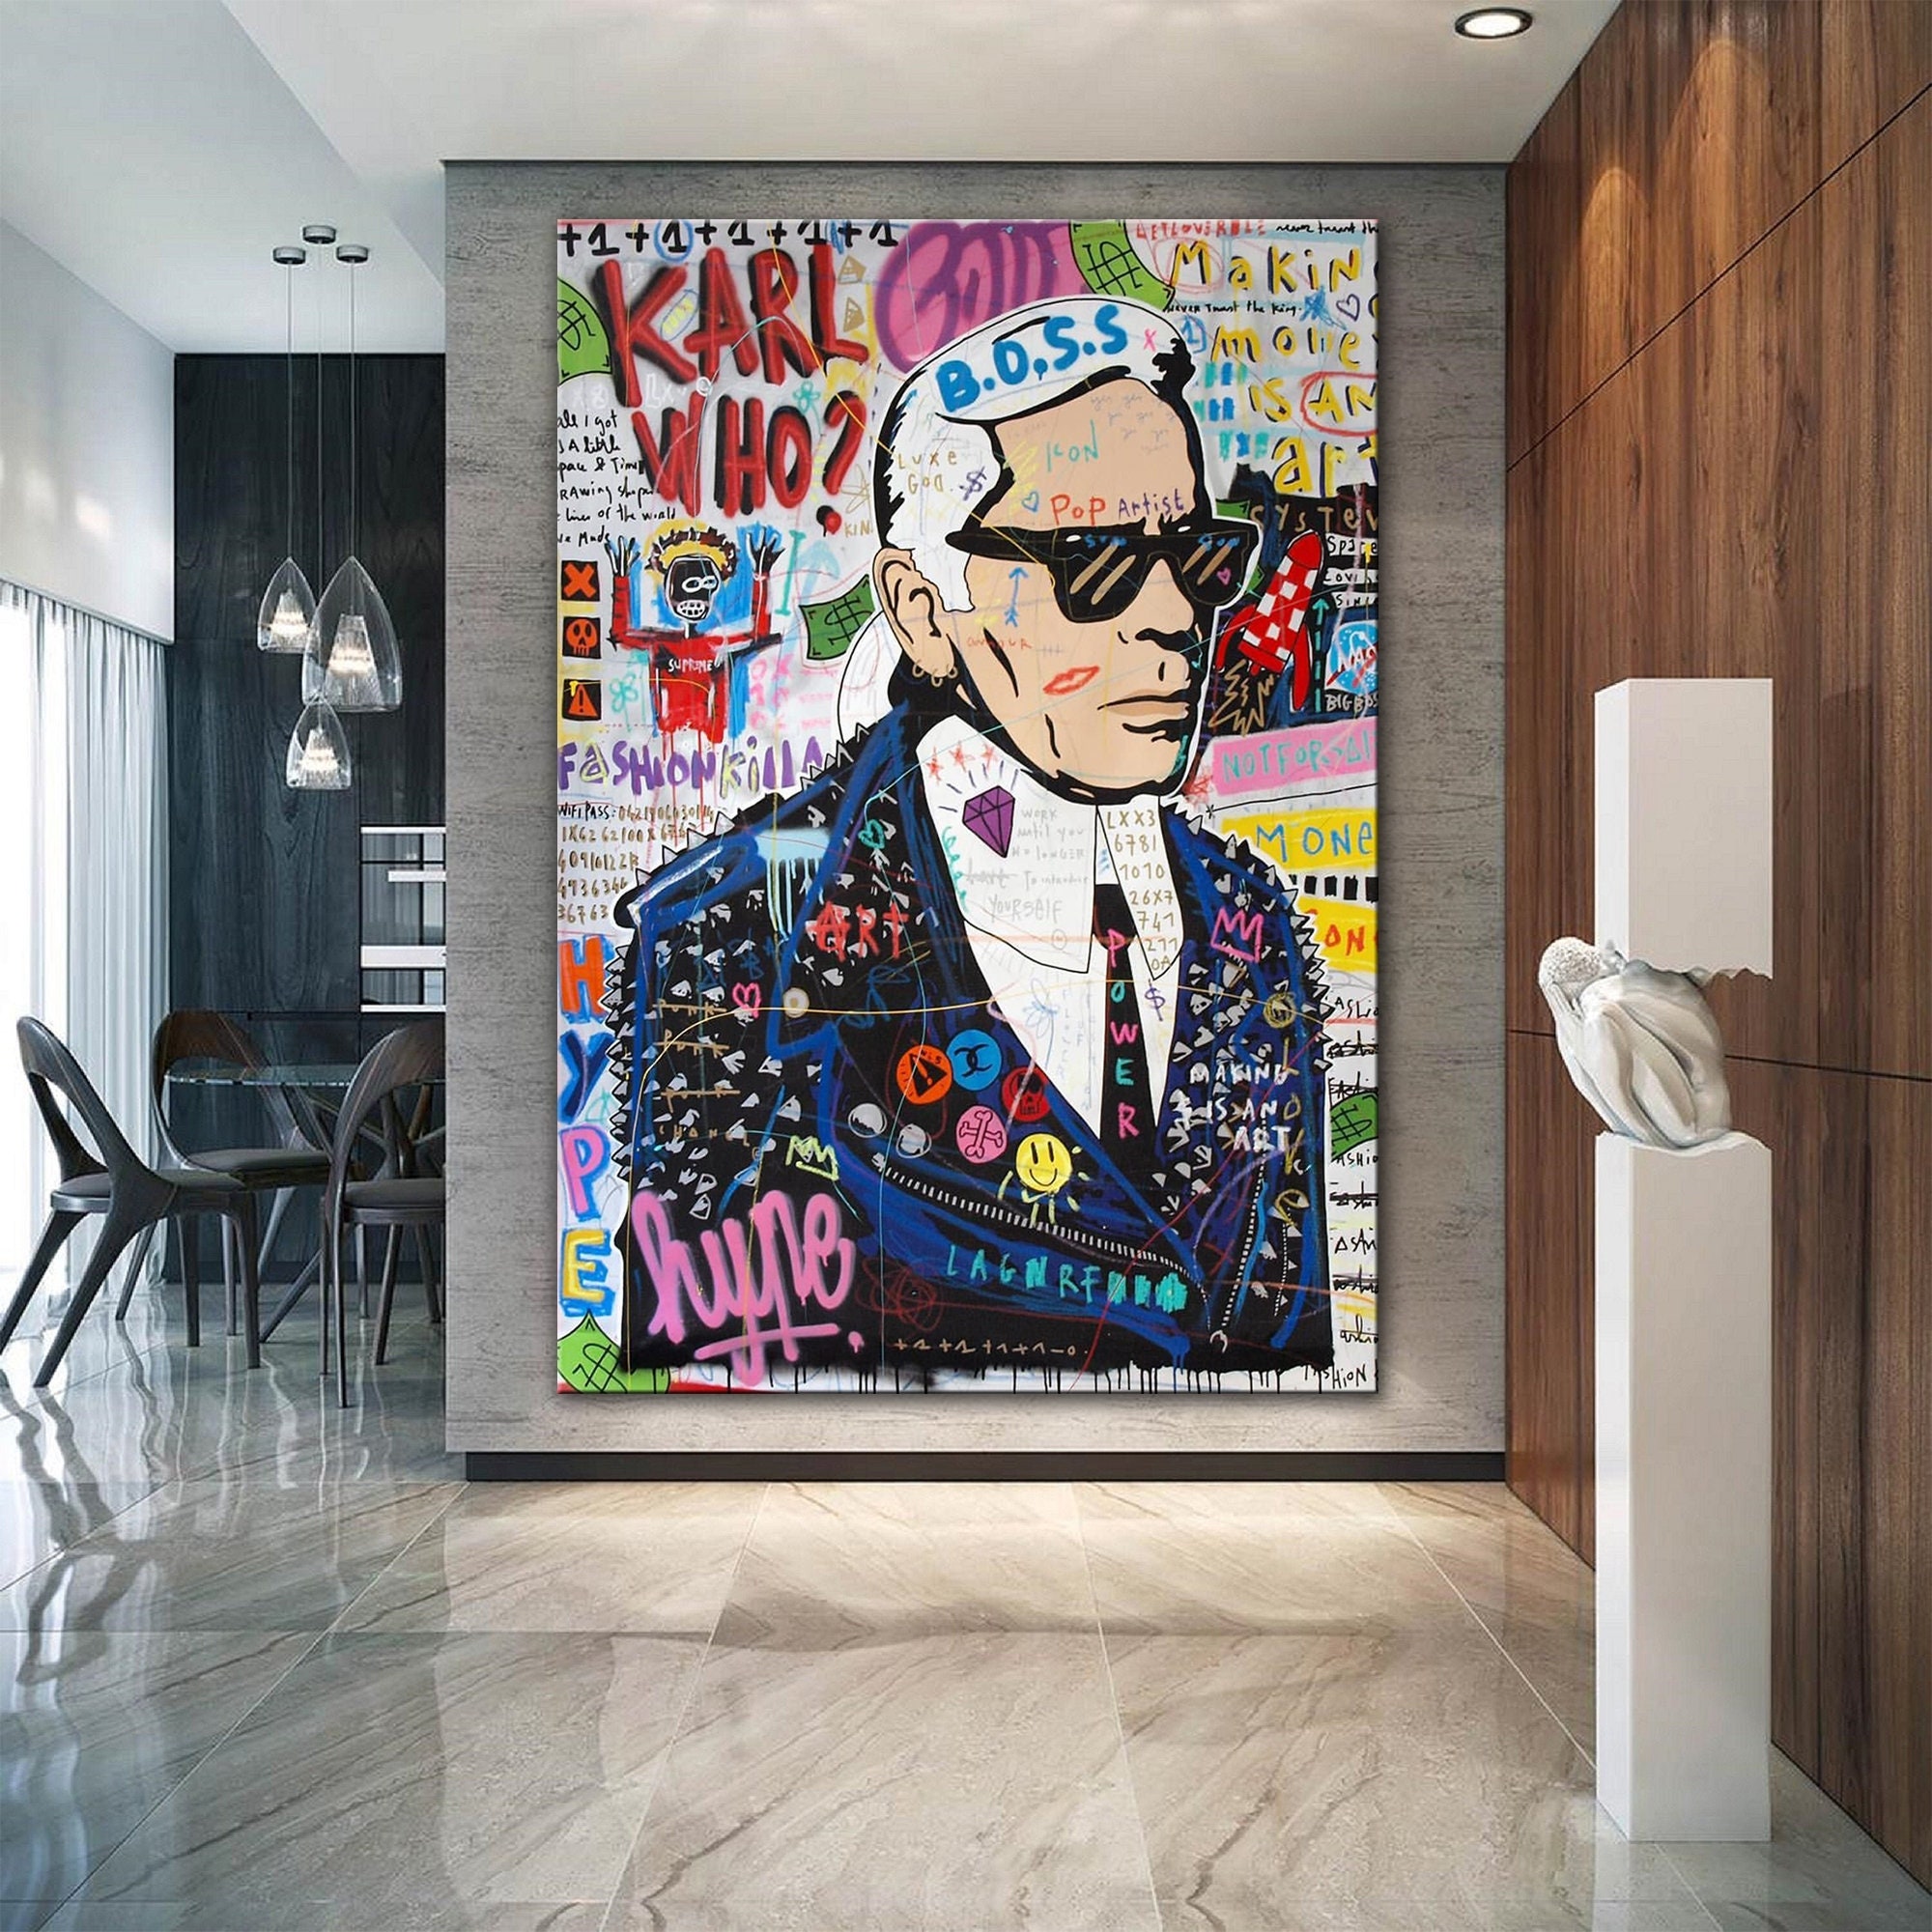 Karl Lagerfeld Launches a $2,850 Limited-Edition Art Supply Kit With  Faber-Castell